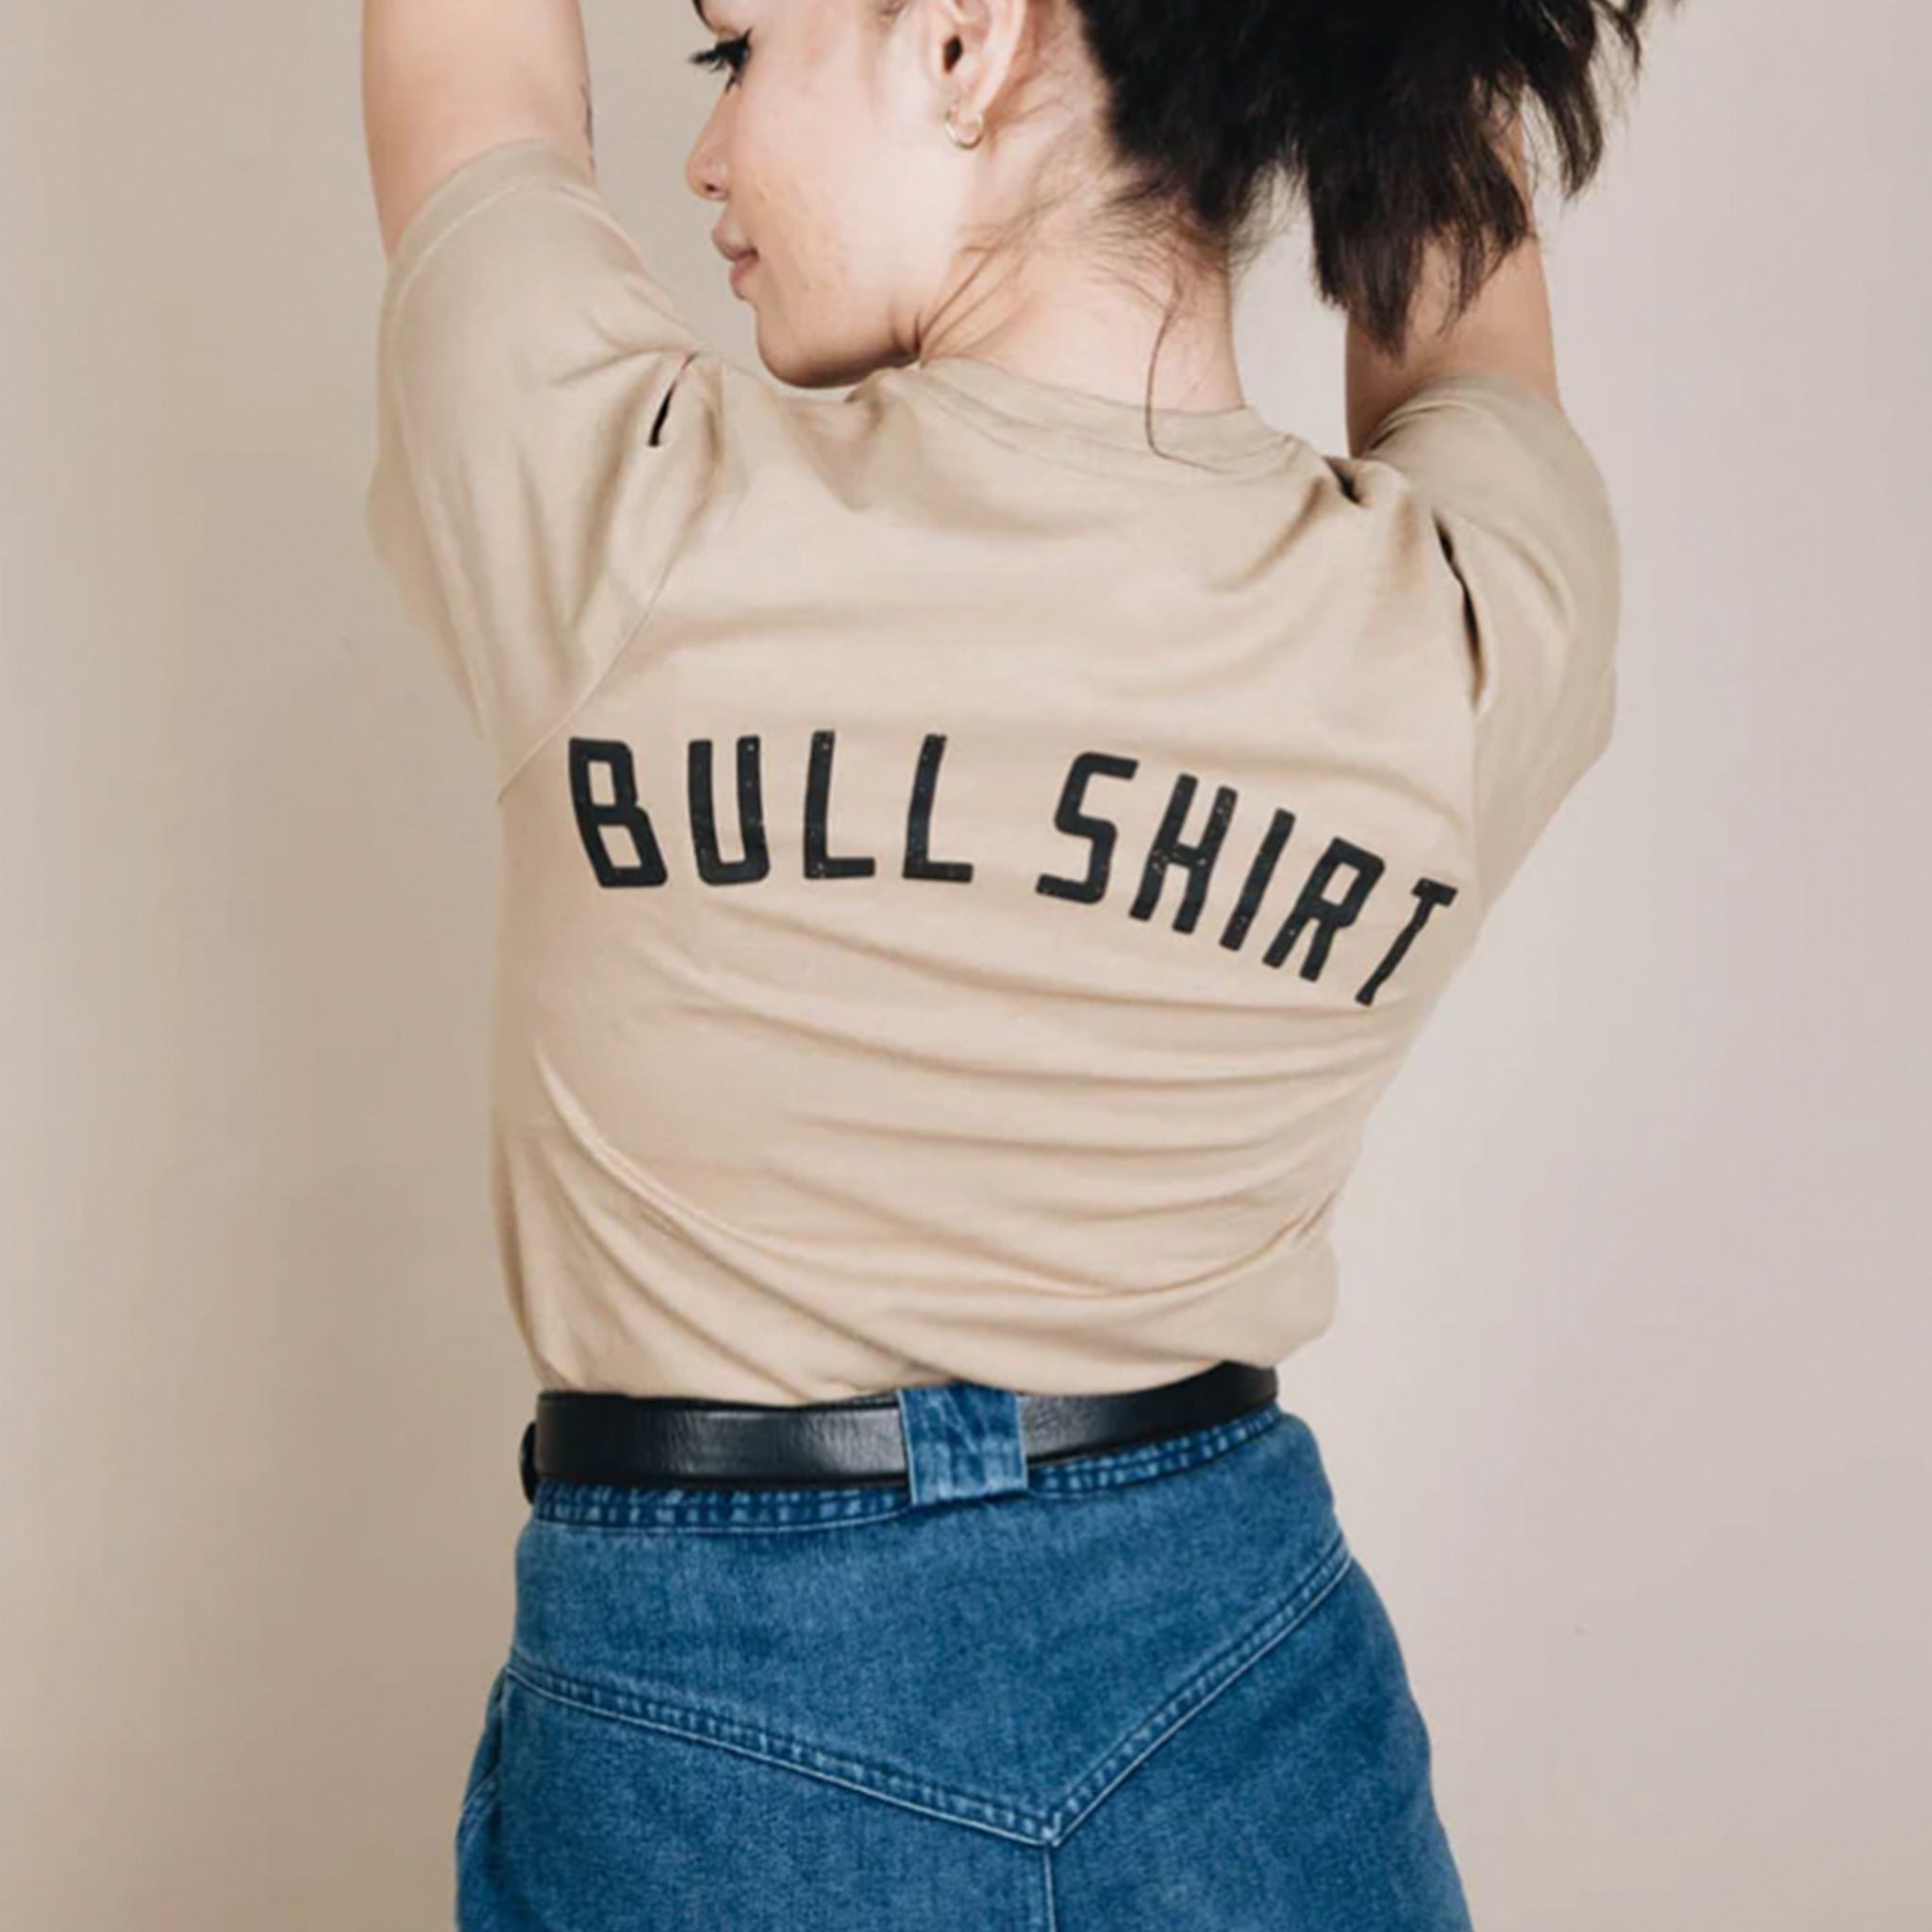 On a tan background is a tan t-shirt with a black bull screen printed on the front and text on the back that reads, "Bull Shirt".